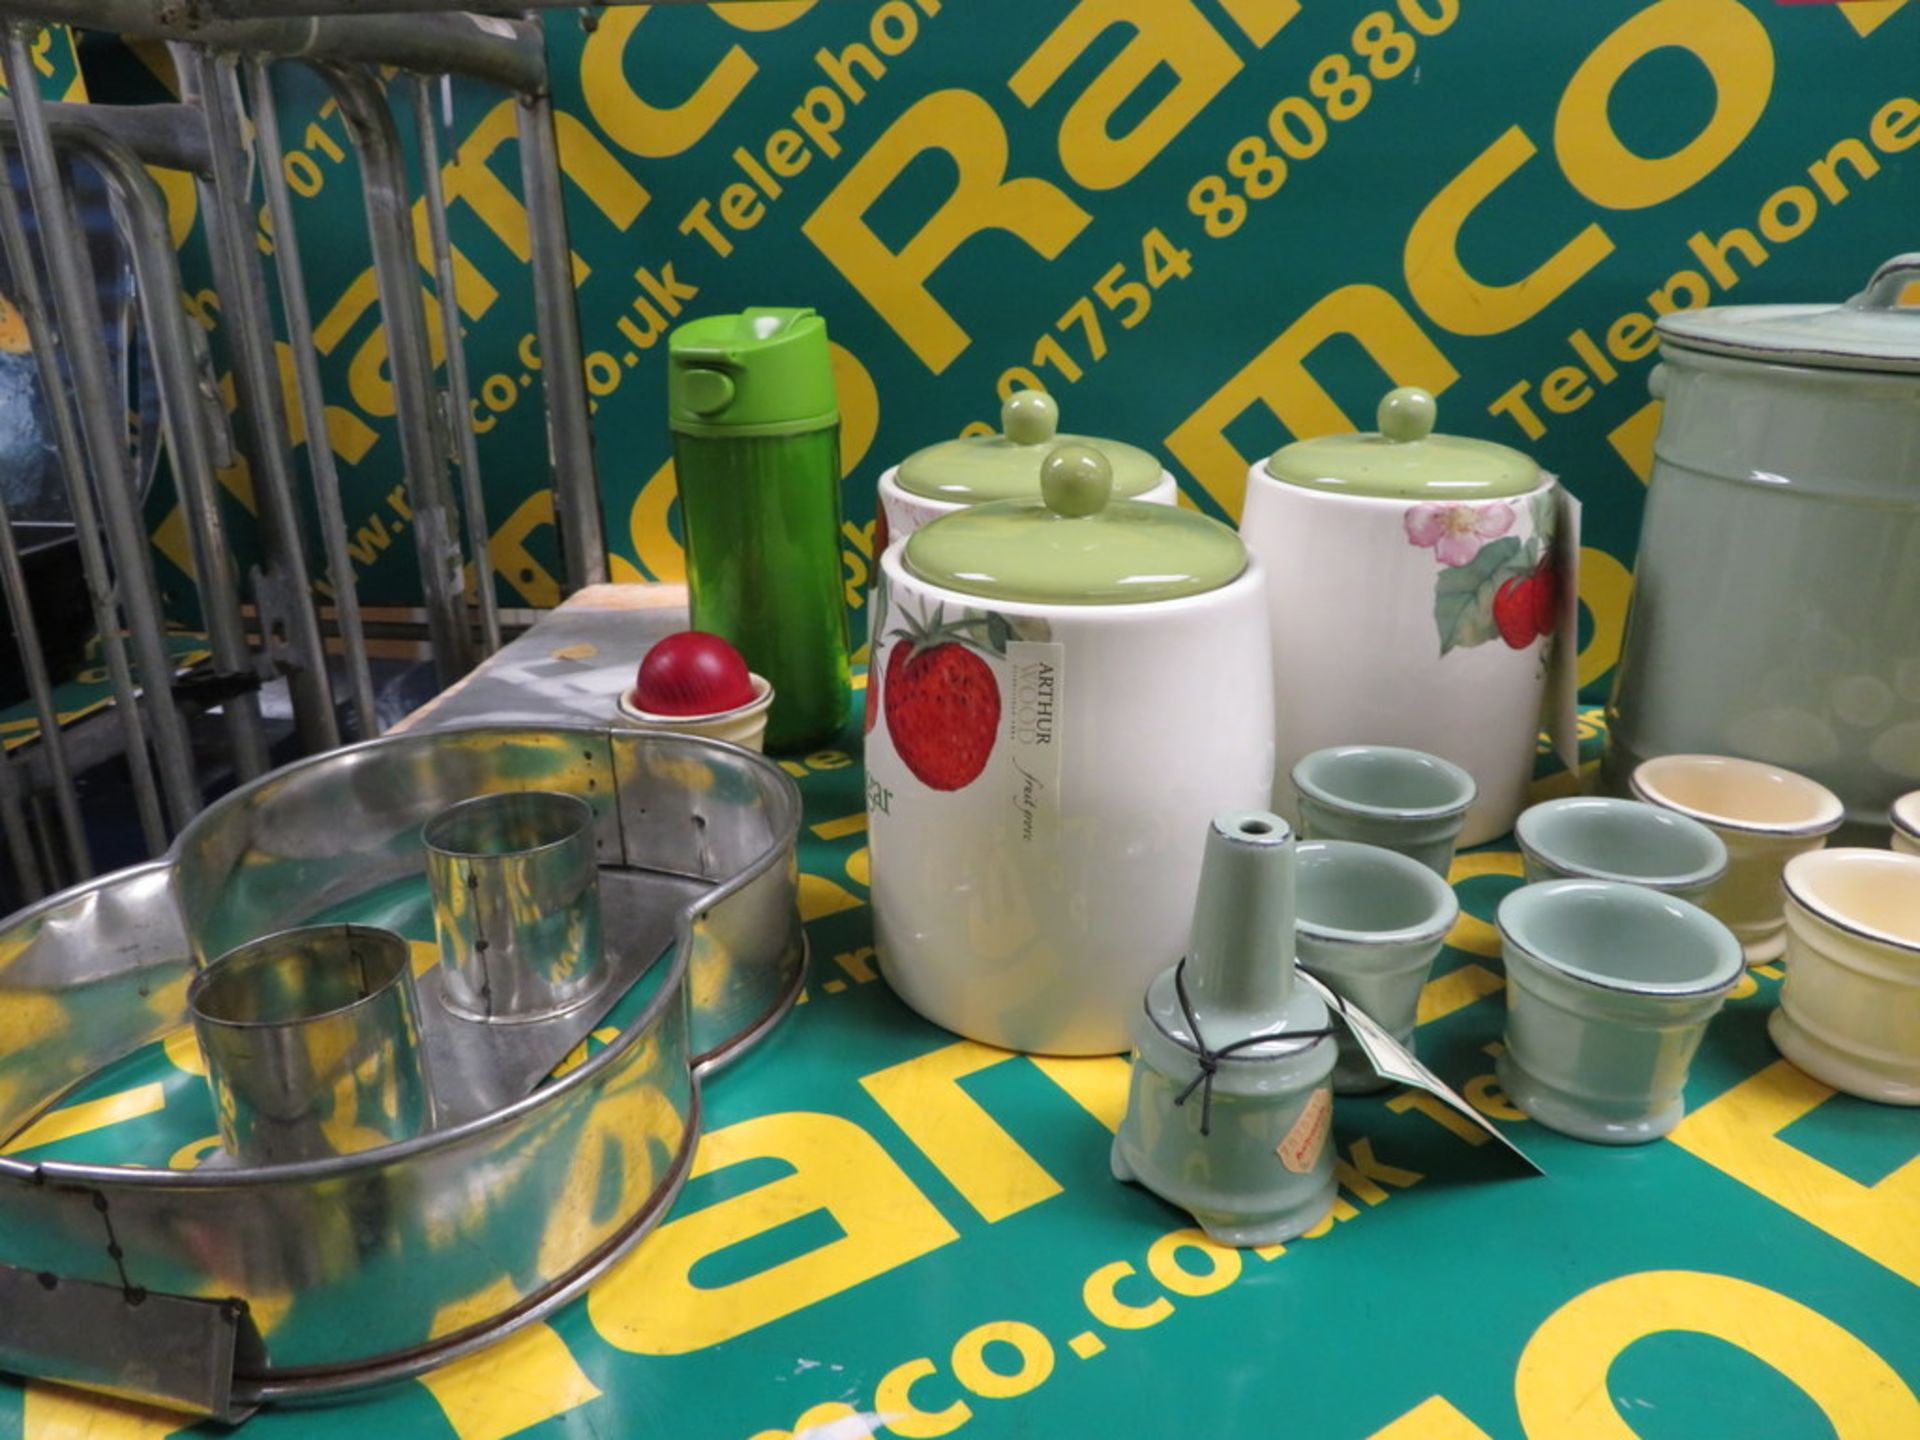 Storage containers, egg cups, drinks bottle, Eco can crusher - Image 3 of 3